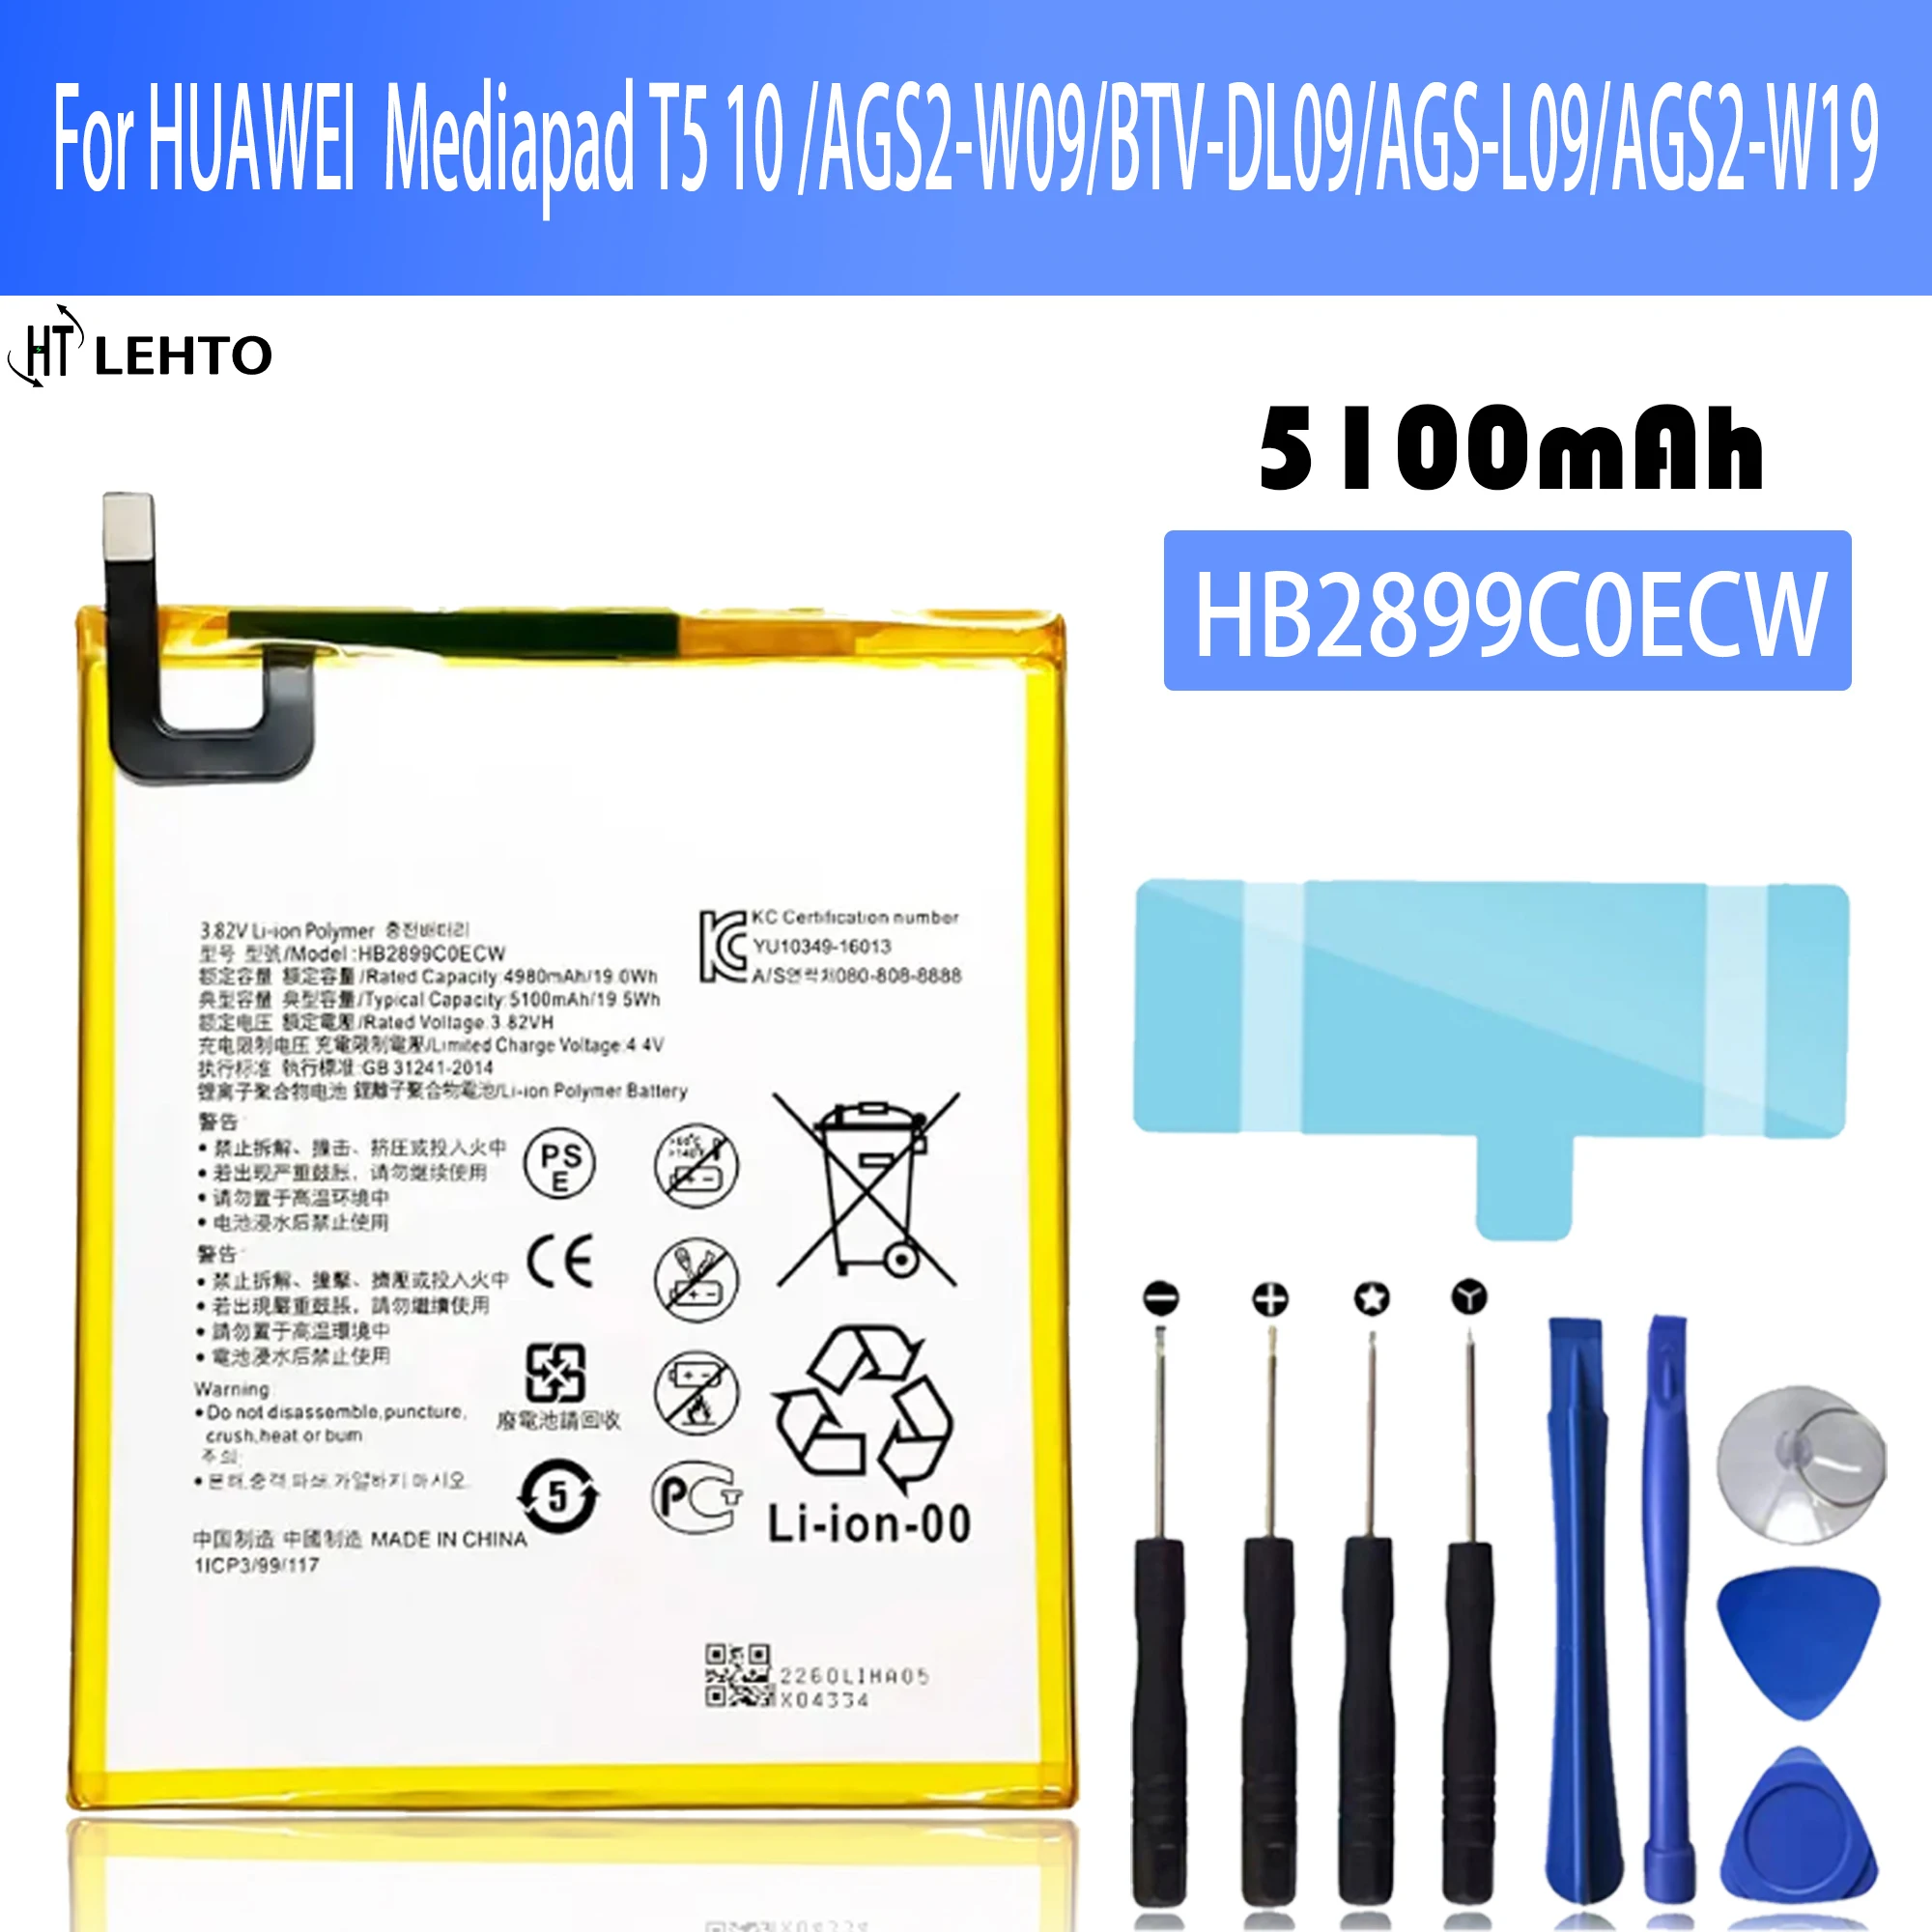 

New 100% original HB2899C0ECW Battery For Huawei MediaPad T5 10 AGS2-L09 AGS2-W09 AGS2-L03 AGS2-W19 phone Batteries Bateria+Tool